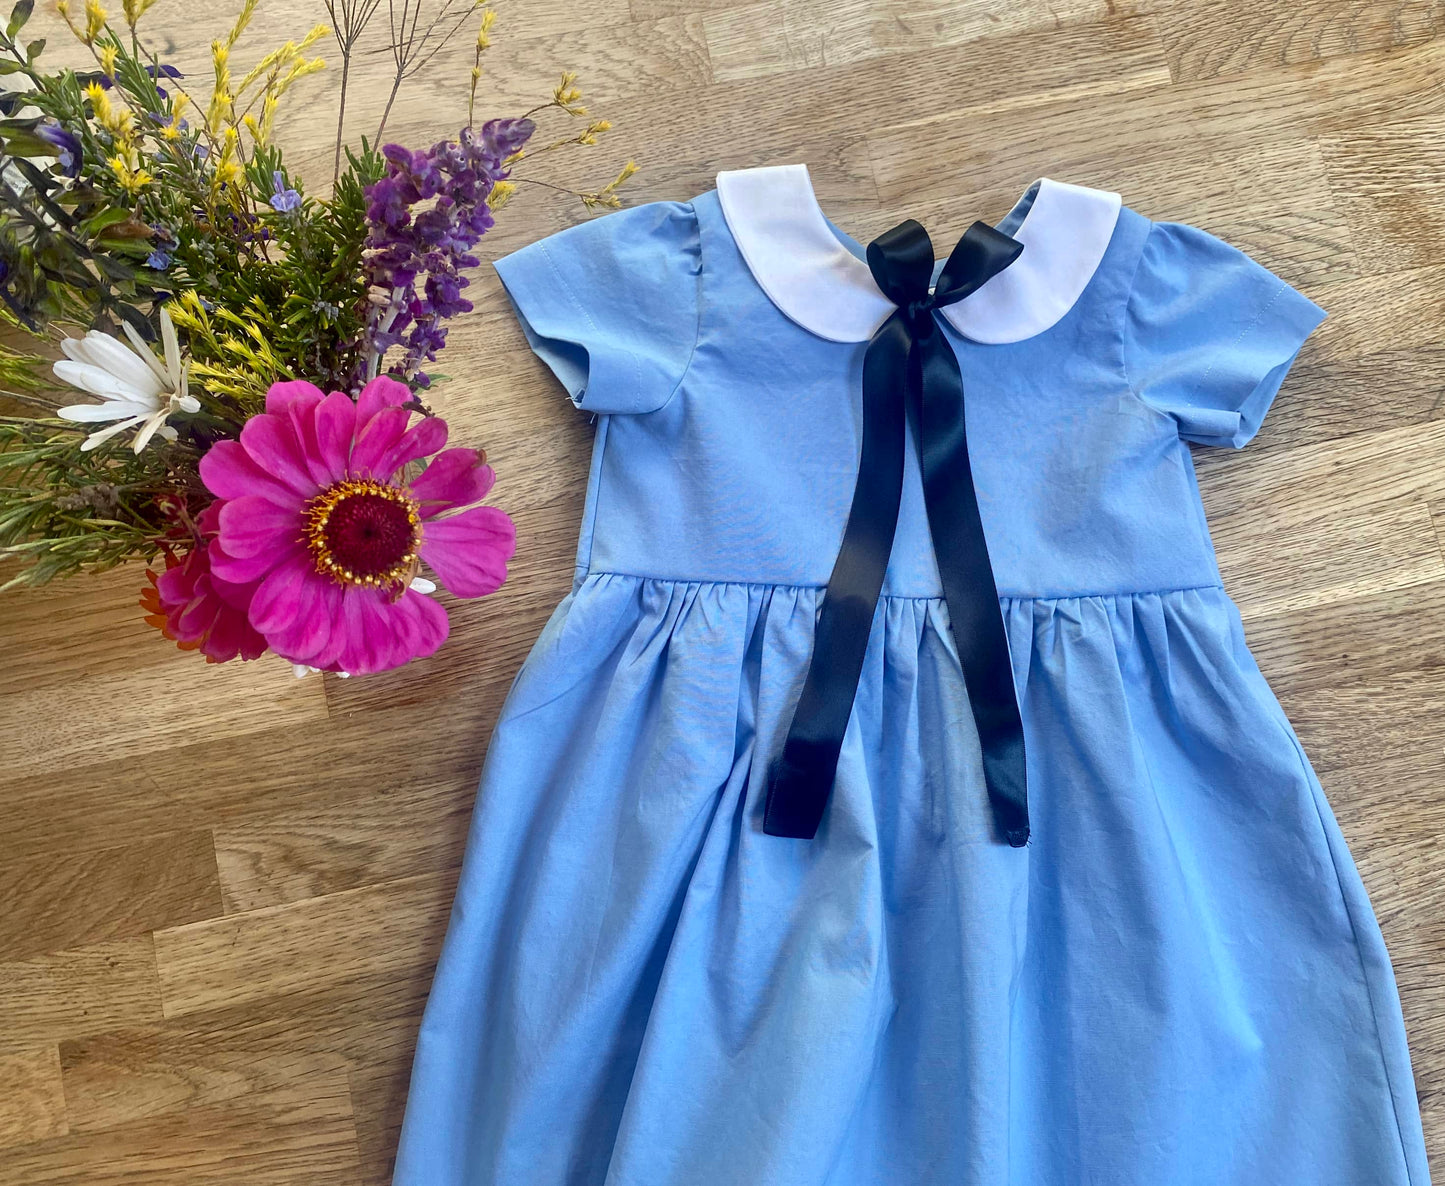 Alice in Wonderland Inspired, Light Blue Vintage Style Dress with Peter Pan Collar (MADE TO ORDER)